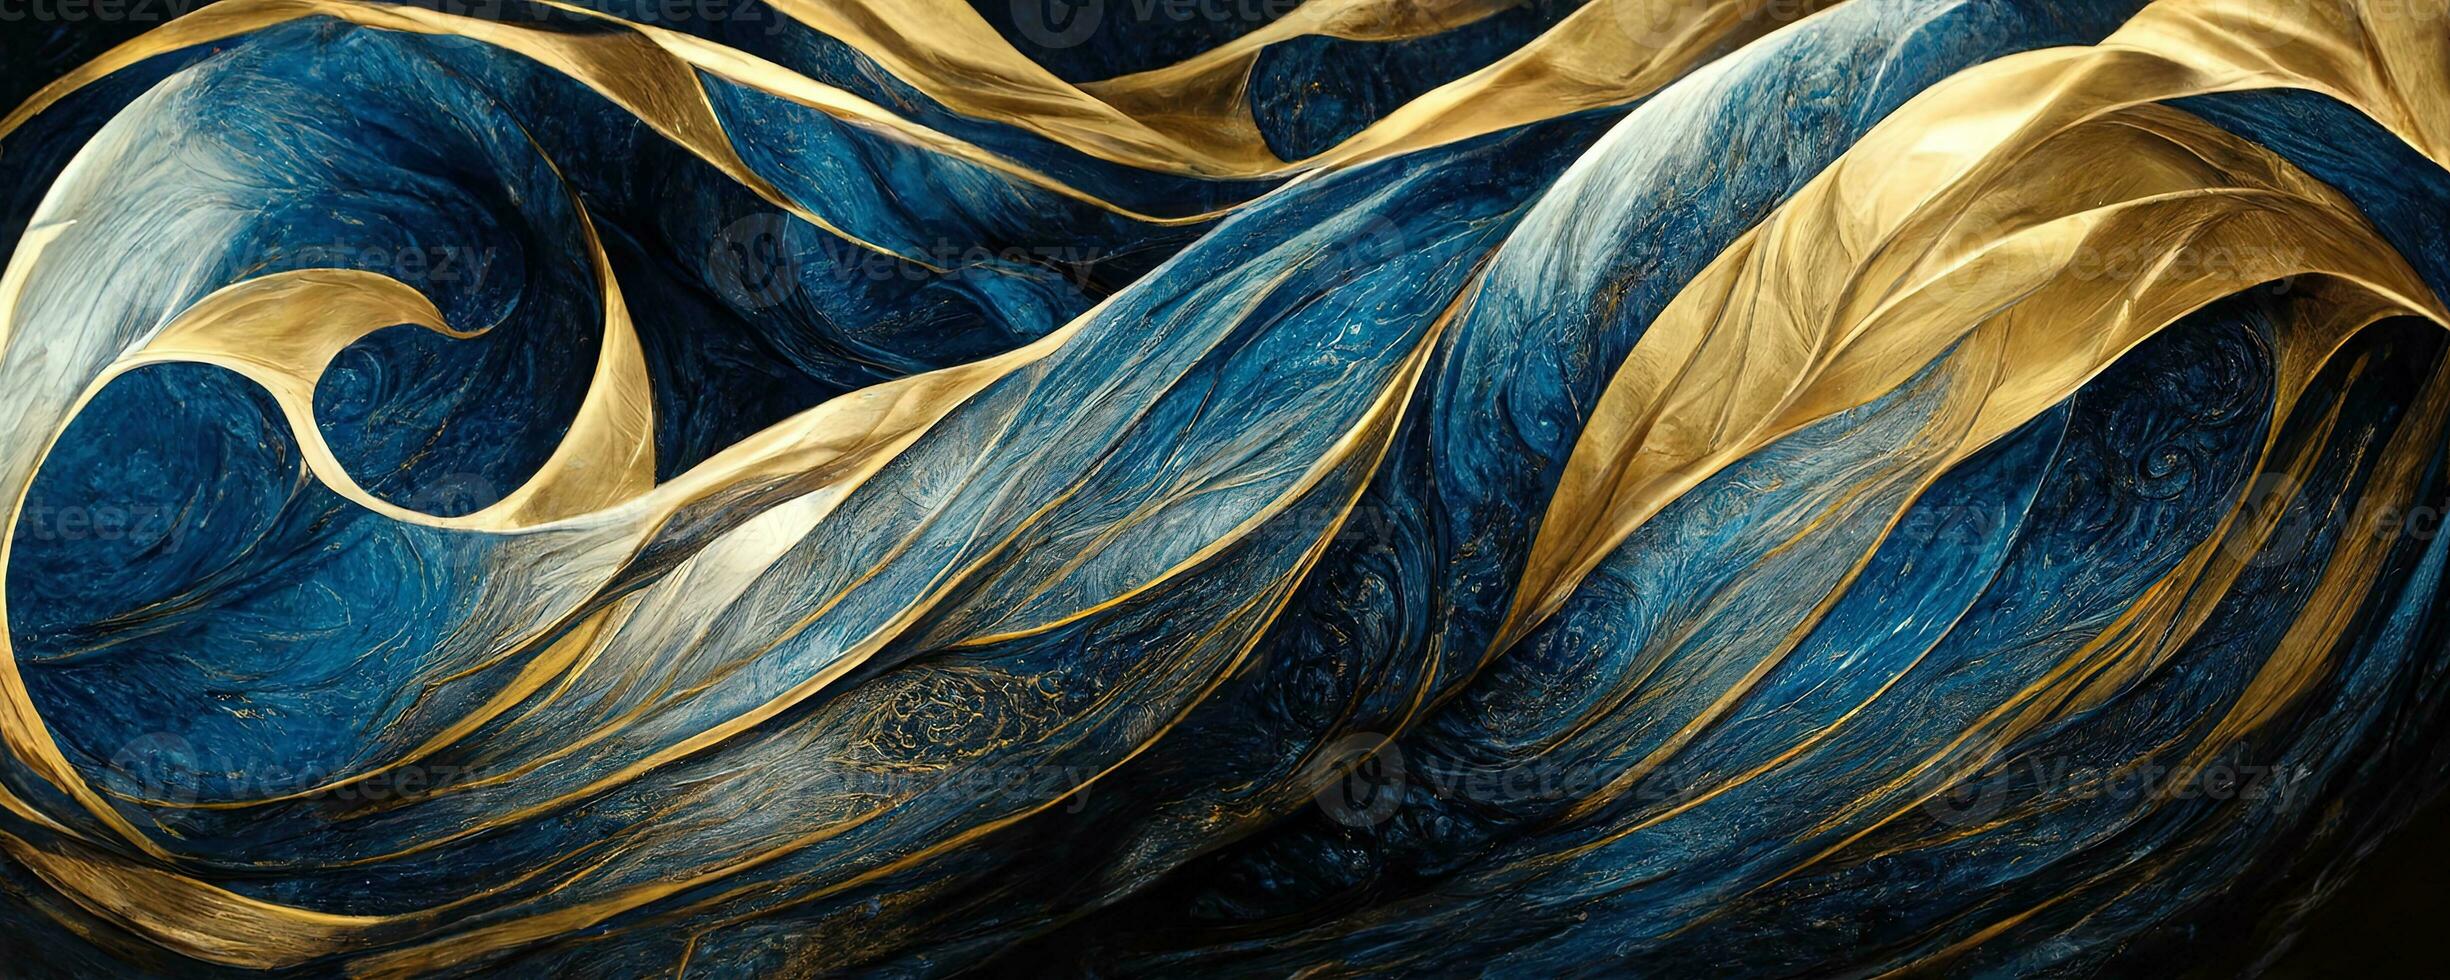 Marble effect background or texture. Spectacular abstract glistening golden solid liquid waves. Swirling golden and blue pastel pattern, shining golden and green color, marble geometric, vintage, photo